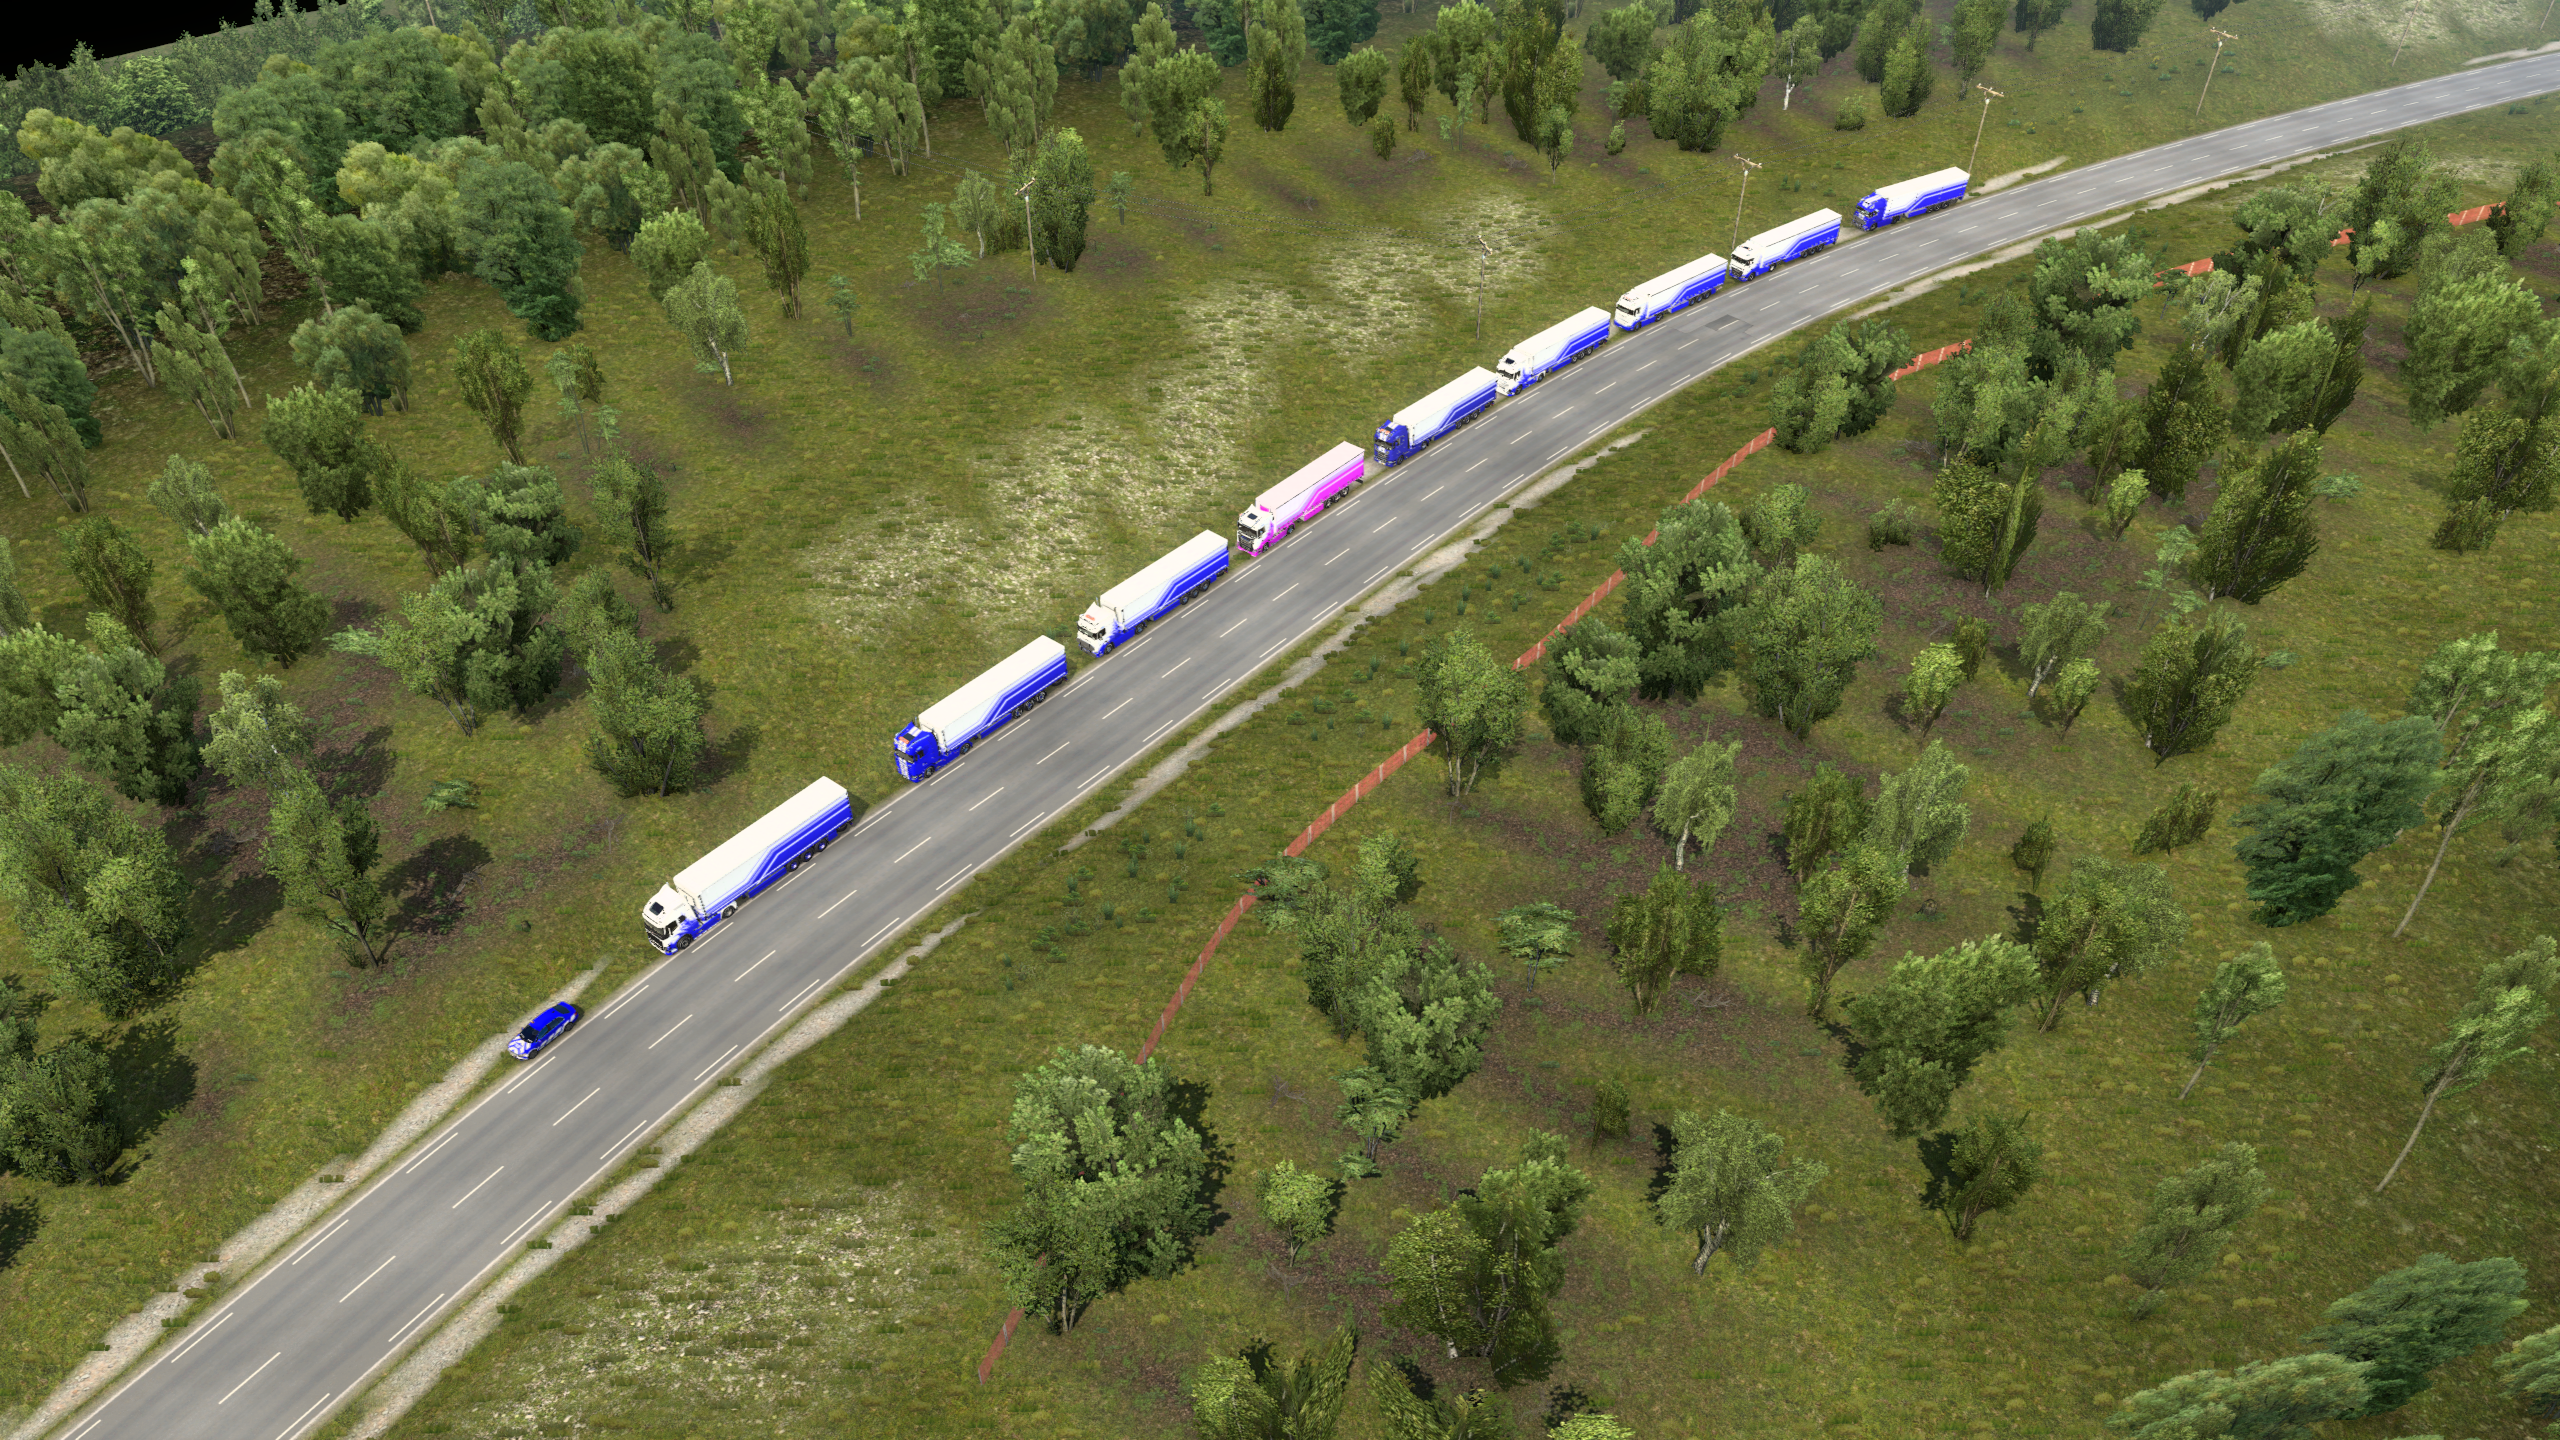 ets2_20211203_230133_00.png